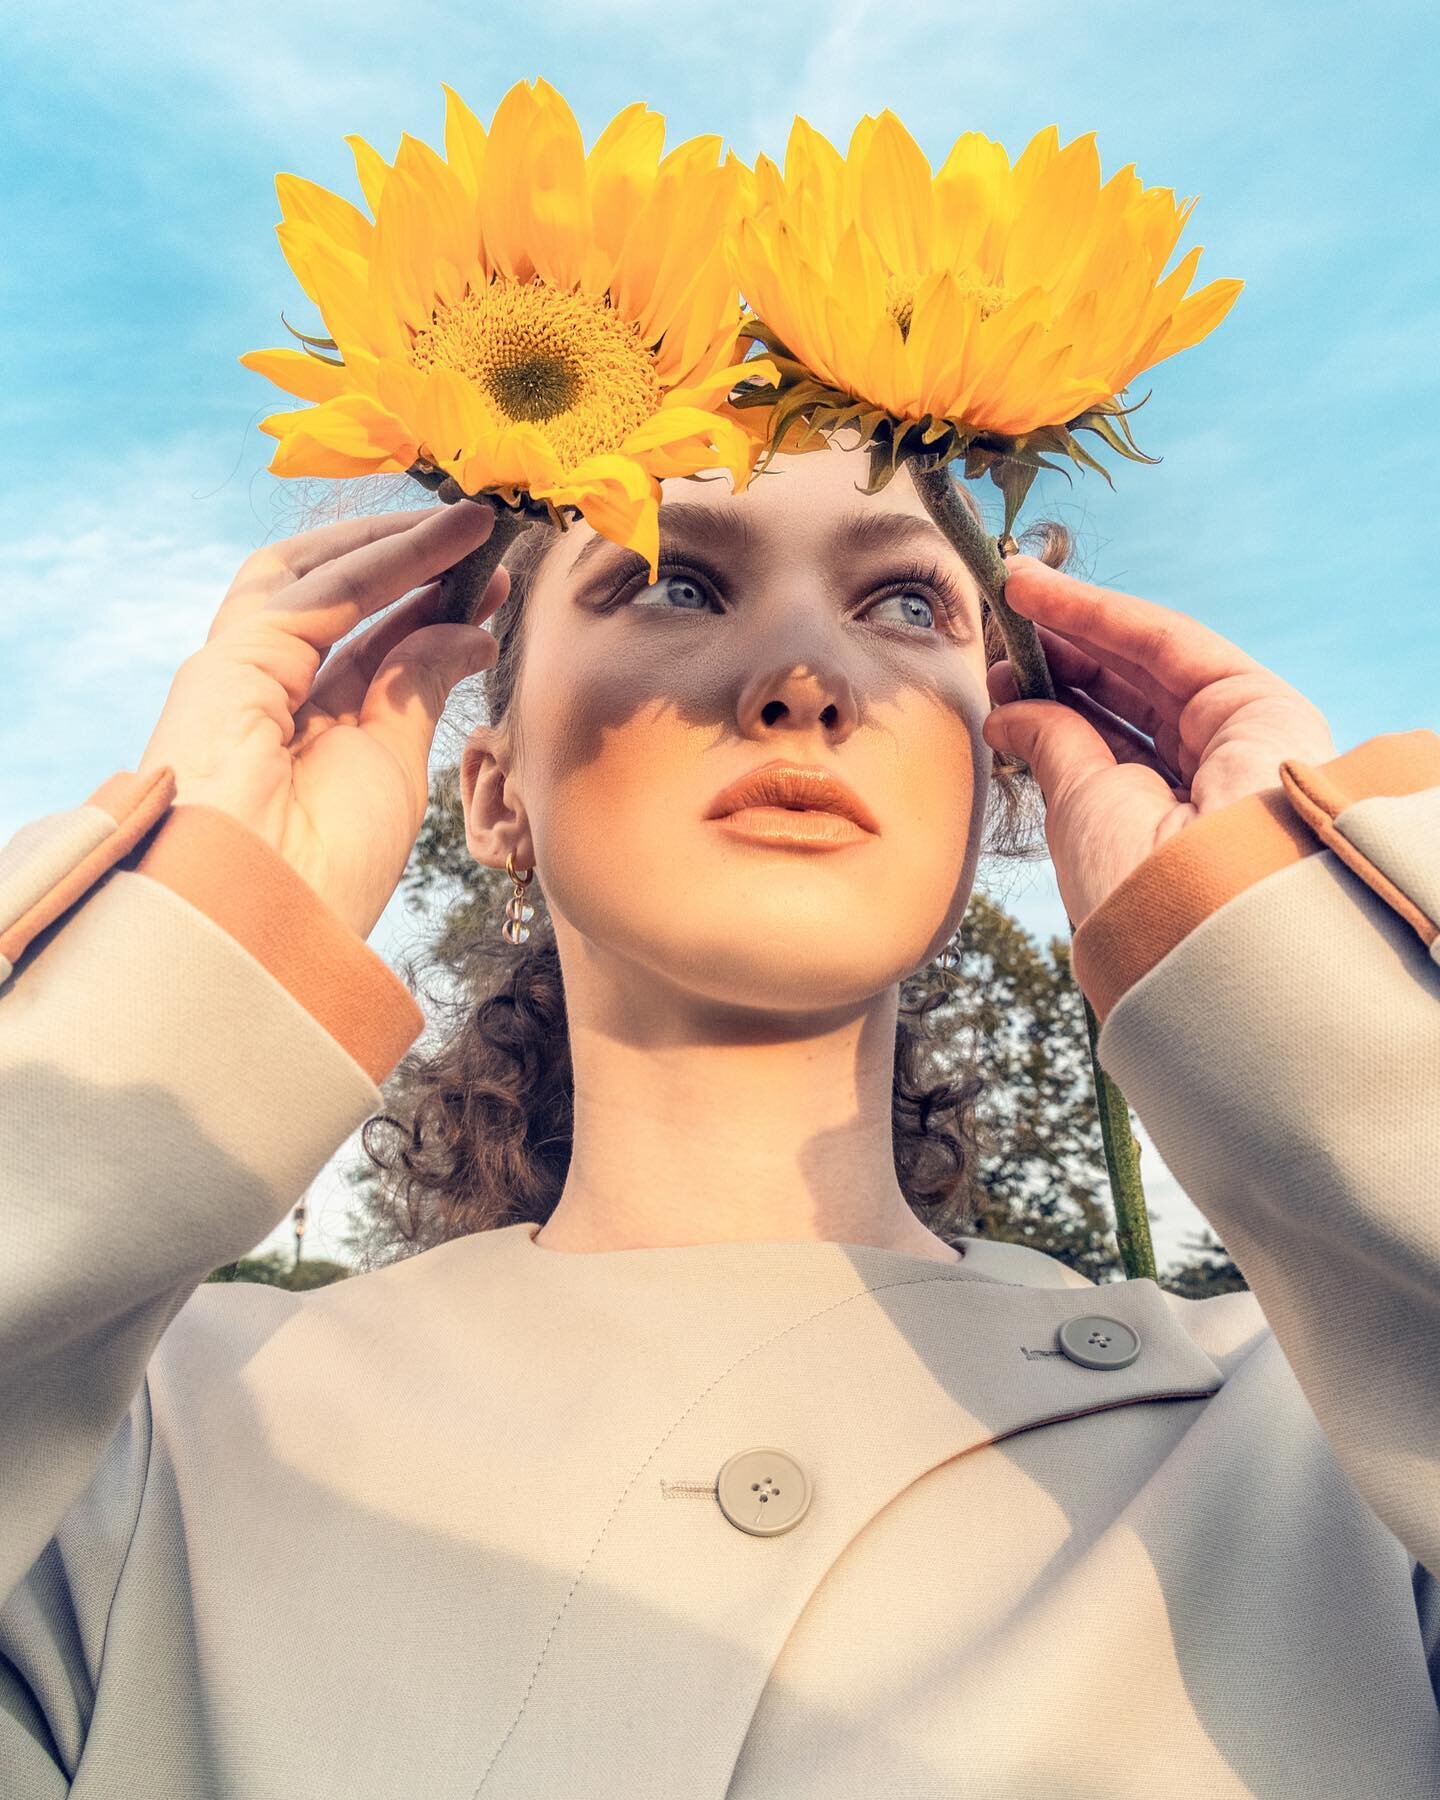 🌻Hiding in plain sight 🌻

Featuring @claireleeyours and @averypiepenburg with @fordmodels 
Wardrobe by @kate_lo and 
Hair/Makeup by @libbyk.hmua with @labartists 
Props by @nadic - more coming soon!